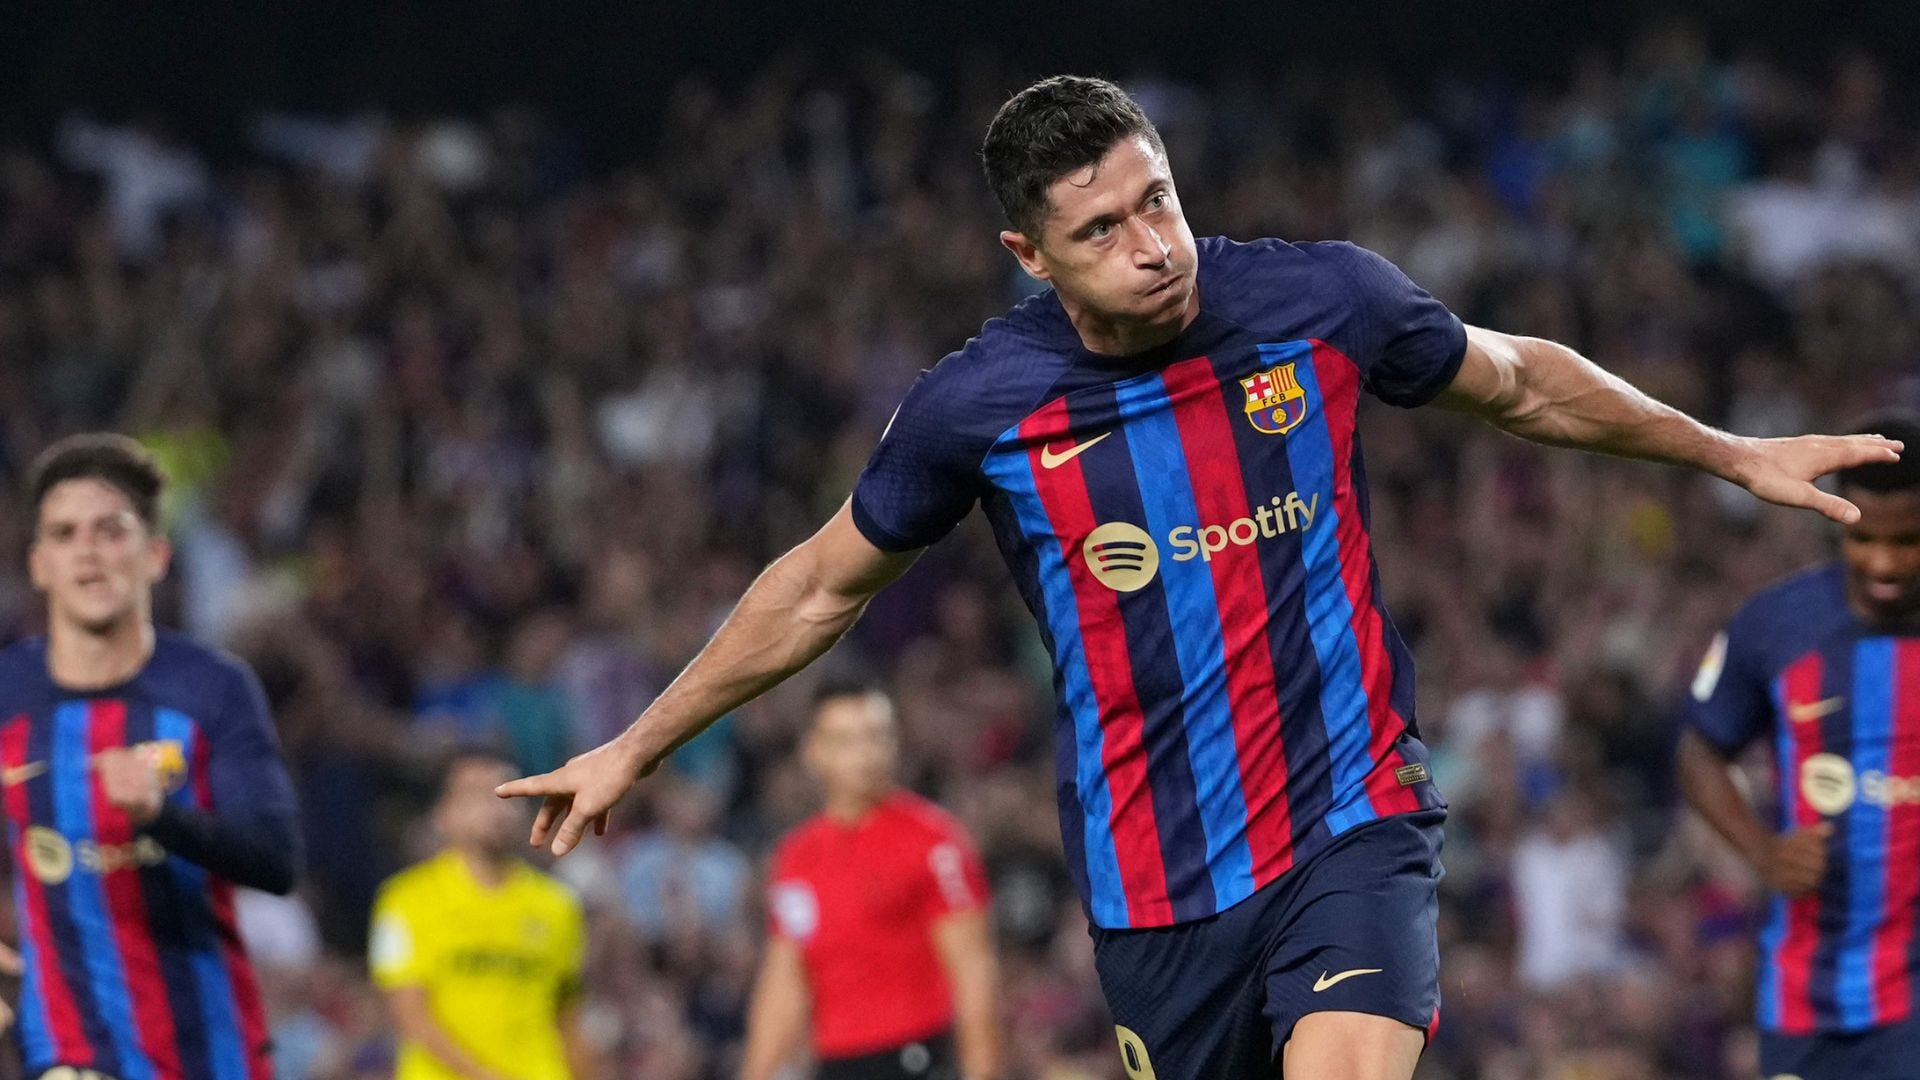 Barcelona vs Athletic Club Live stream, TV channel, kick-off time and where to watch Goal UK